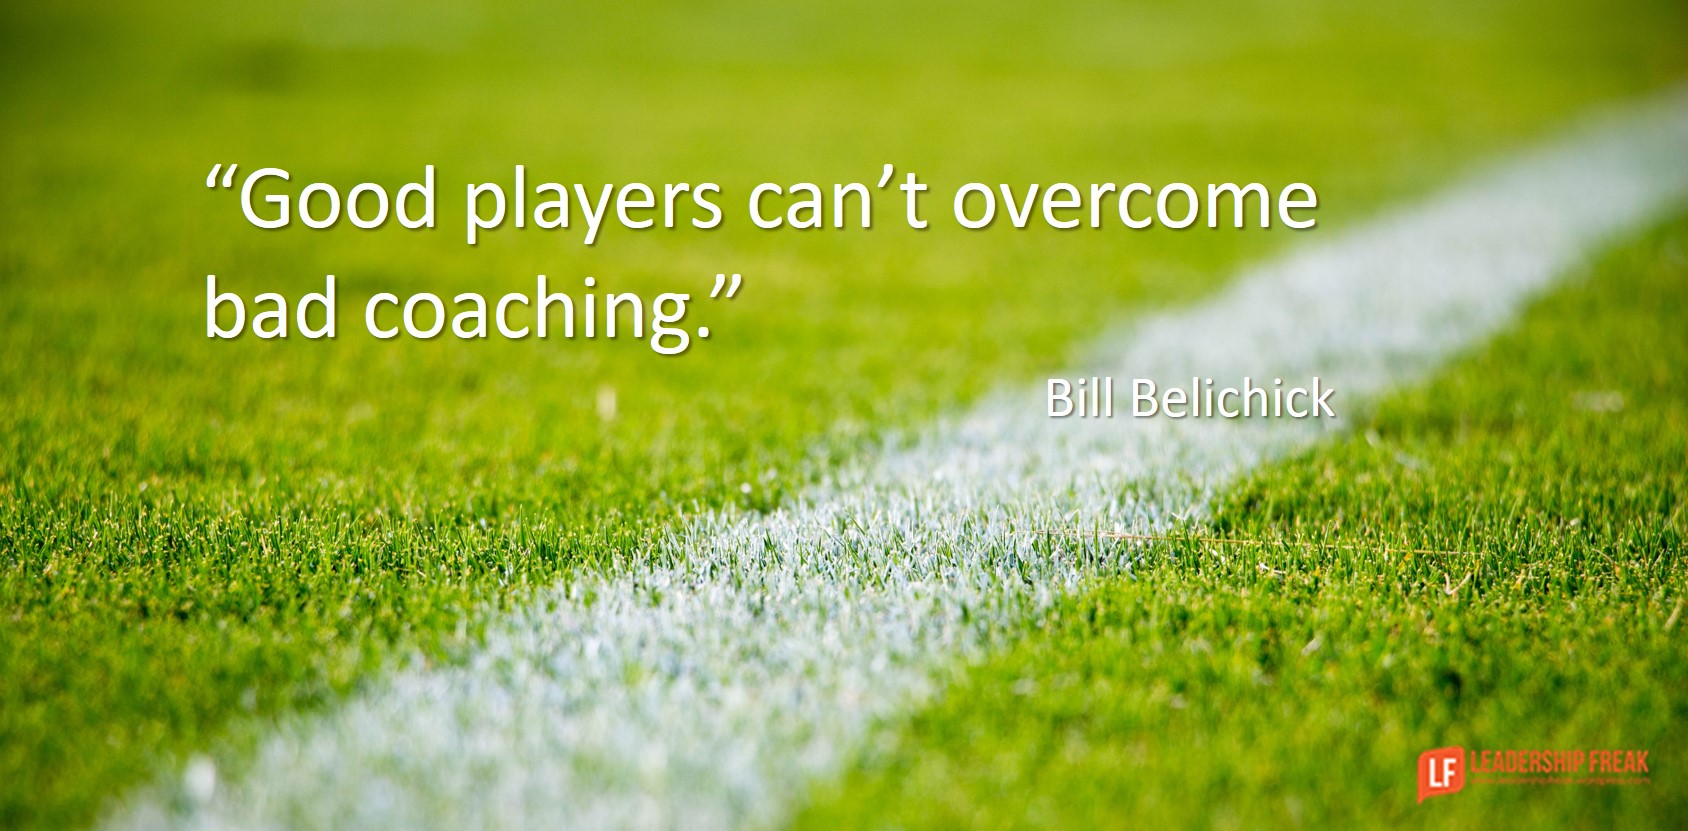 good-players-cant-overcome-bad-coaching.jpg